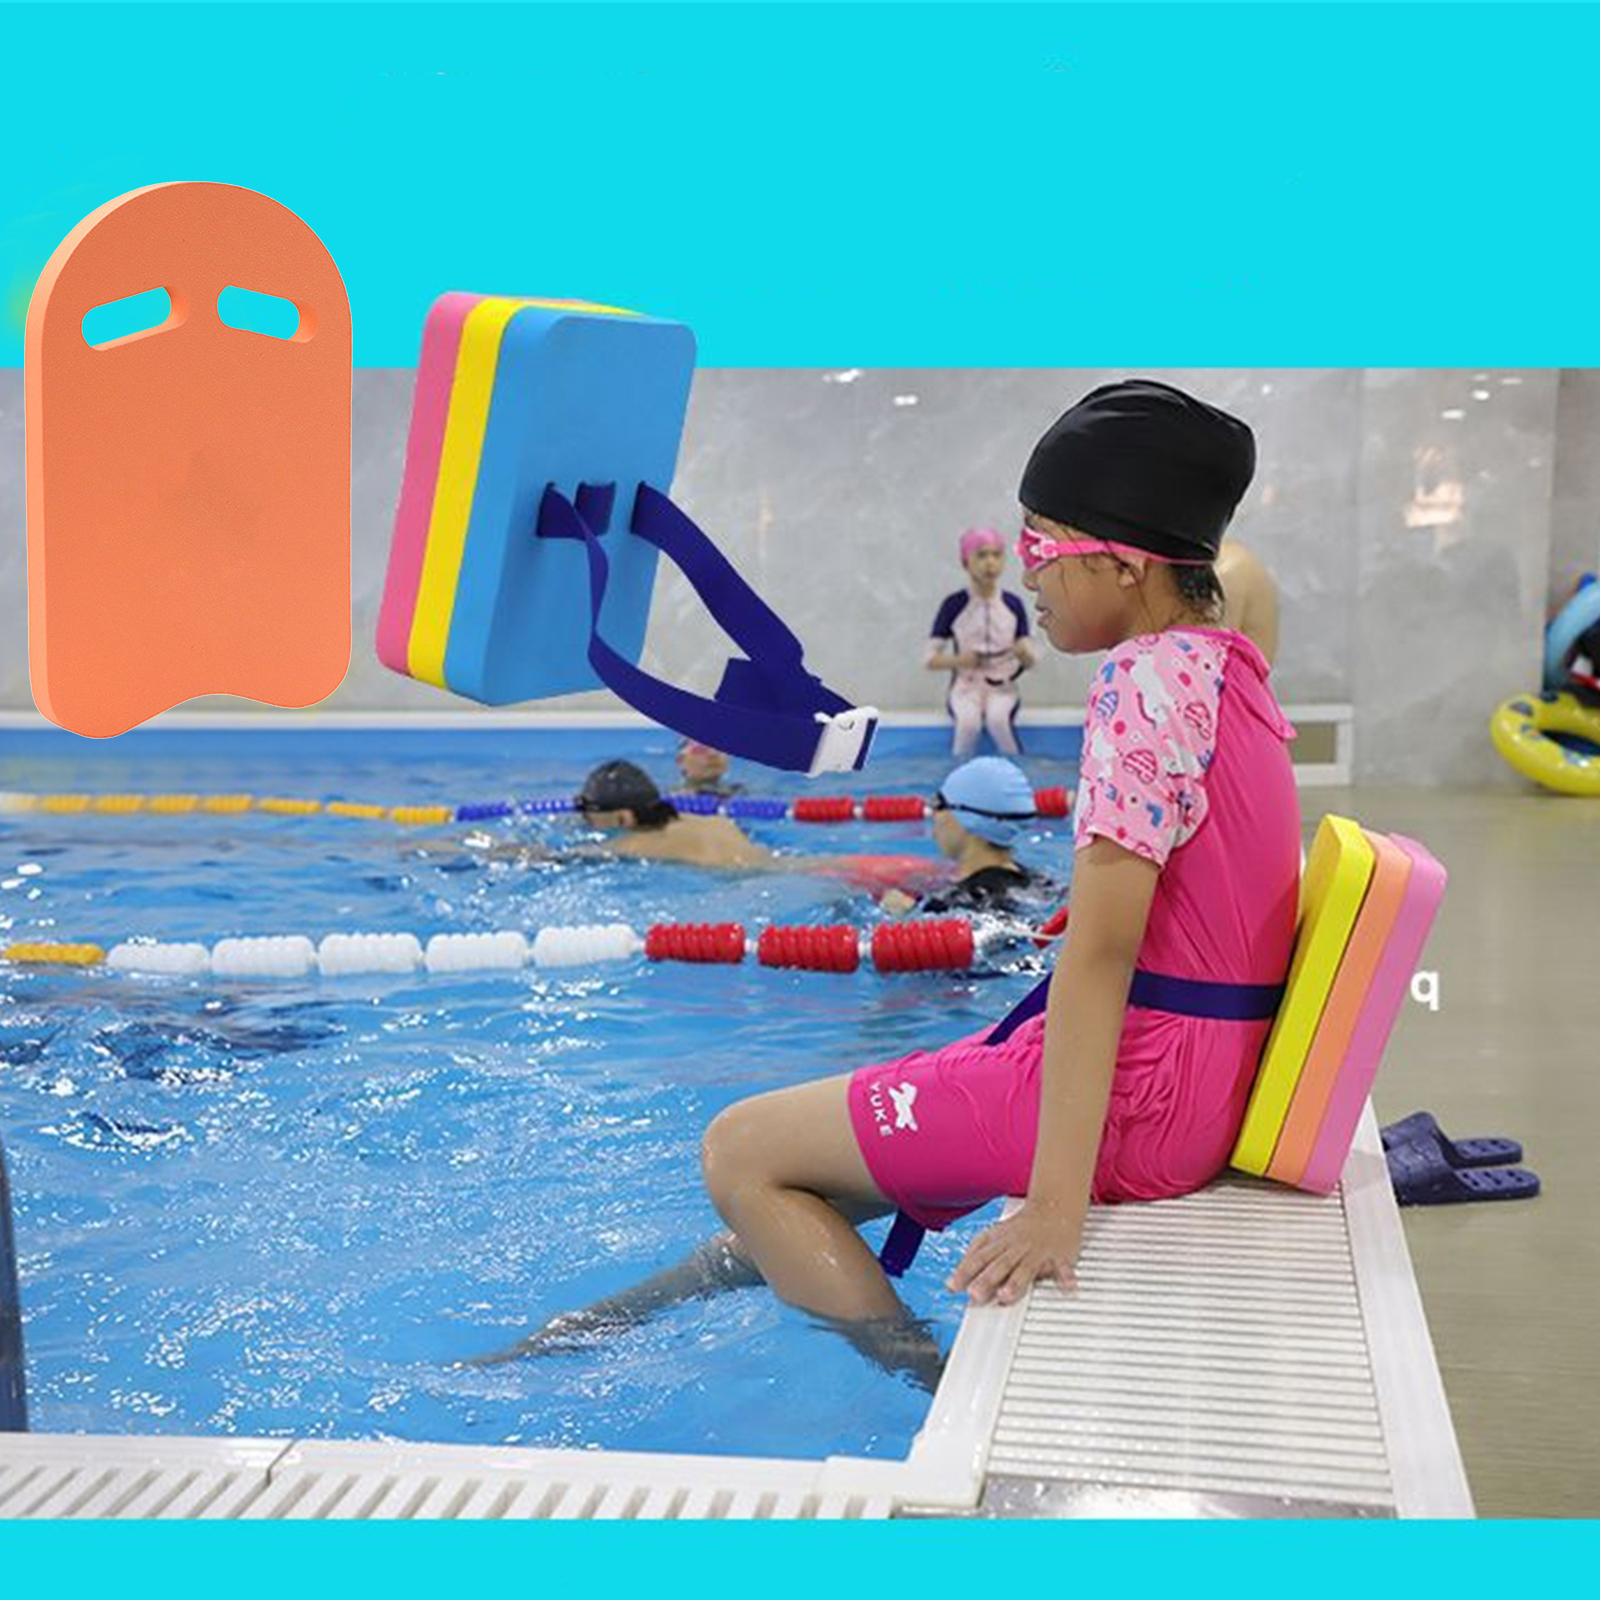 Kids Body Boards Yellow Floating Board Kick Board Adult Children General Safety Thickening Water Training And Swimming Equipment Supplies 1pcs RUZHENG Body Boards Kids 